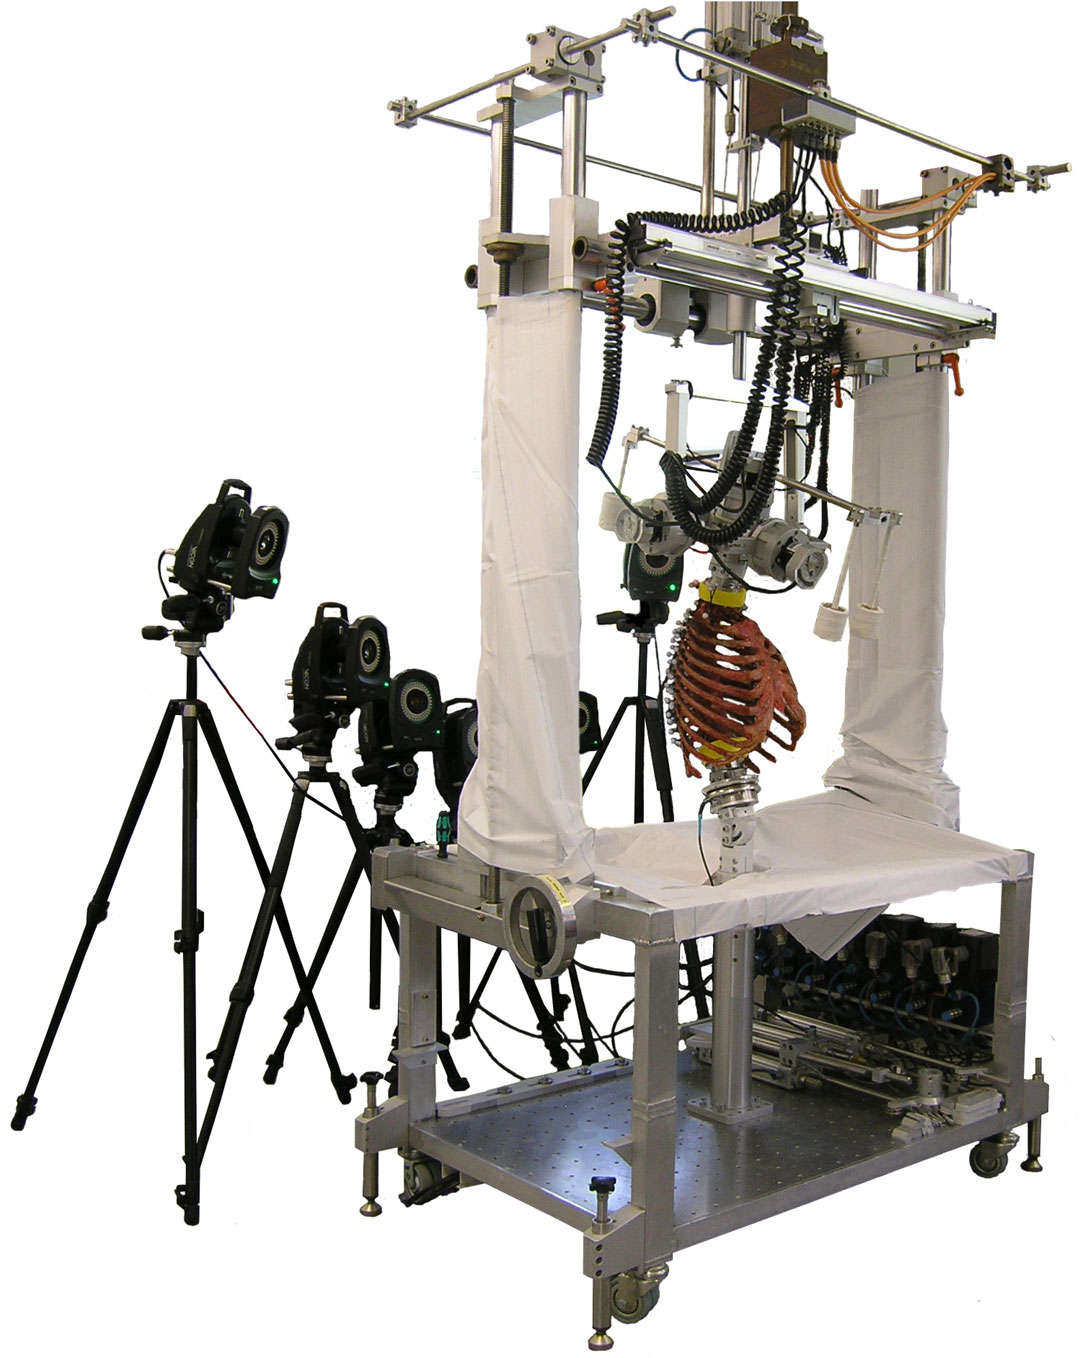 Human thorax in the experimental setup. Image from the article